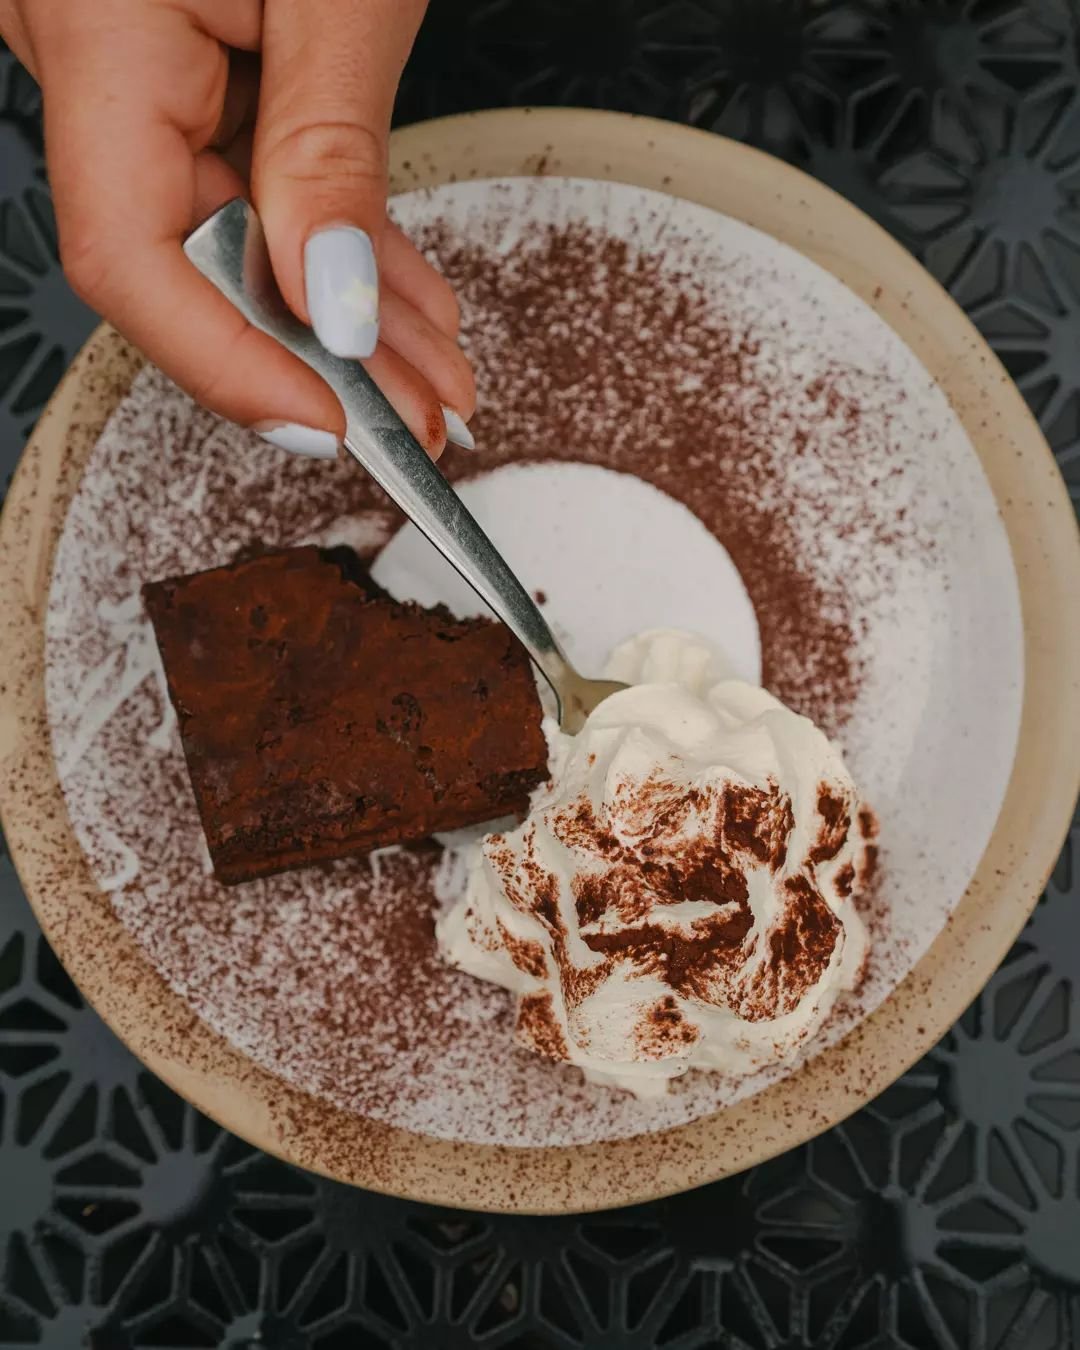 Decadent chocolate brownie 🍫 + a cloud of whipped cream = pure bliss! 😍 Indulge in your dessert dreams at #ConceptCoffee. 

#DessertTime #BrownieLove #CafeDelights #MelbourneEats #IndulgeYourself